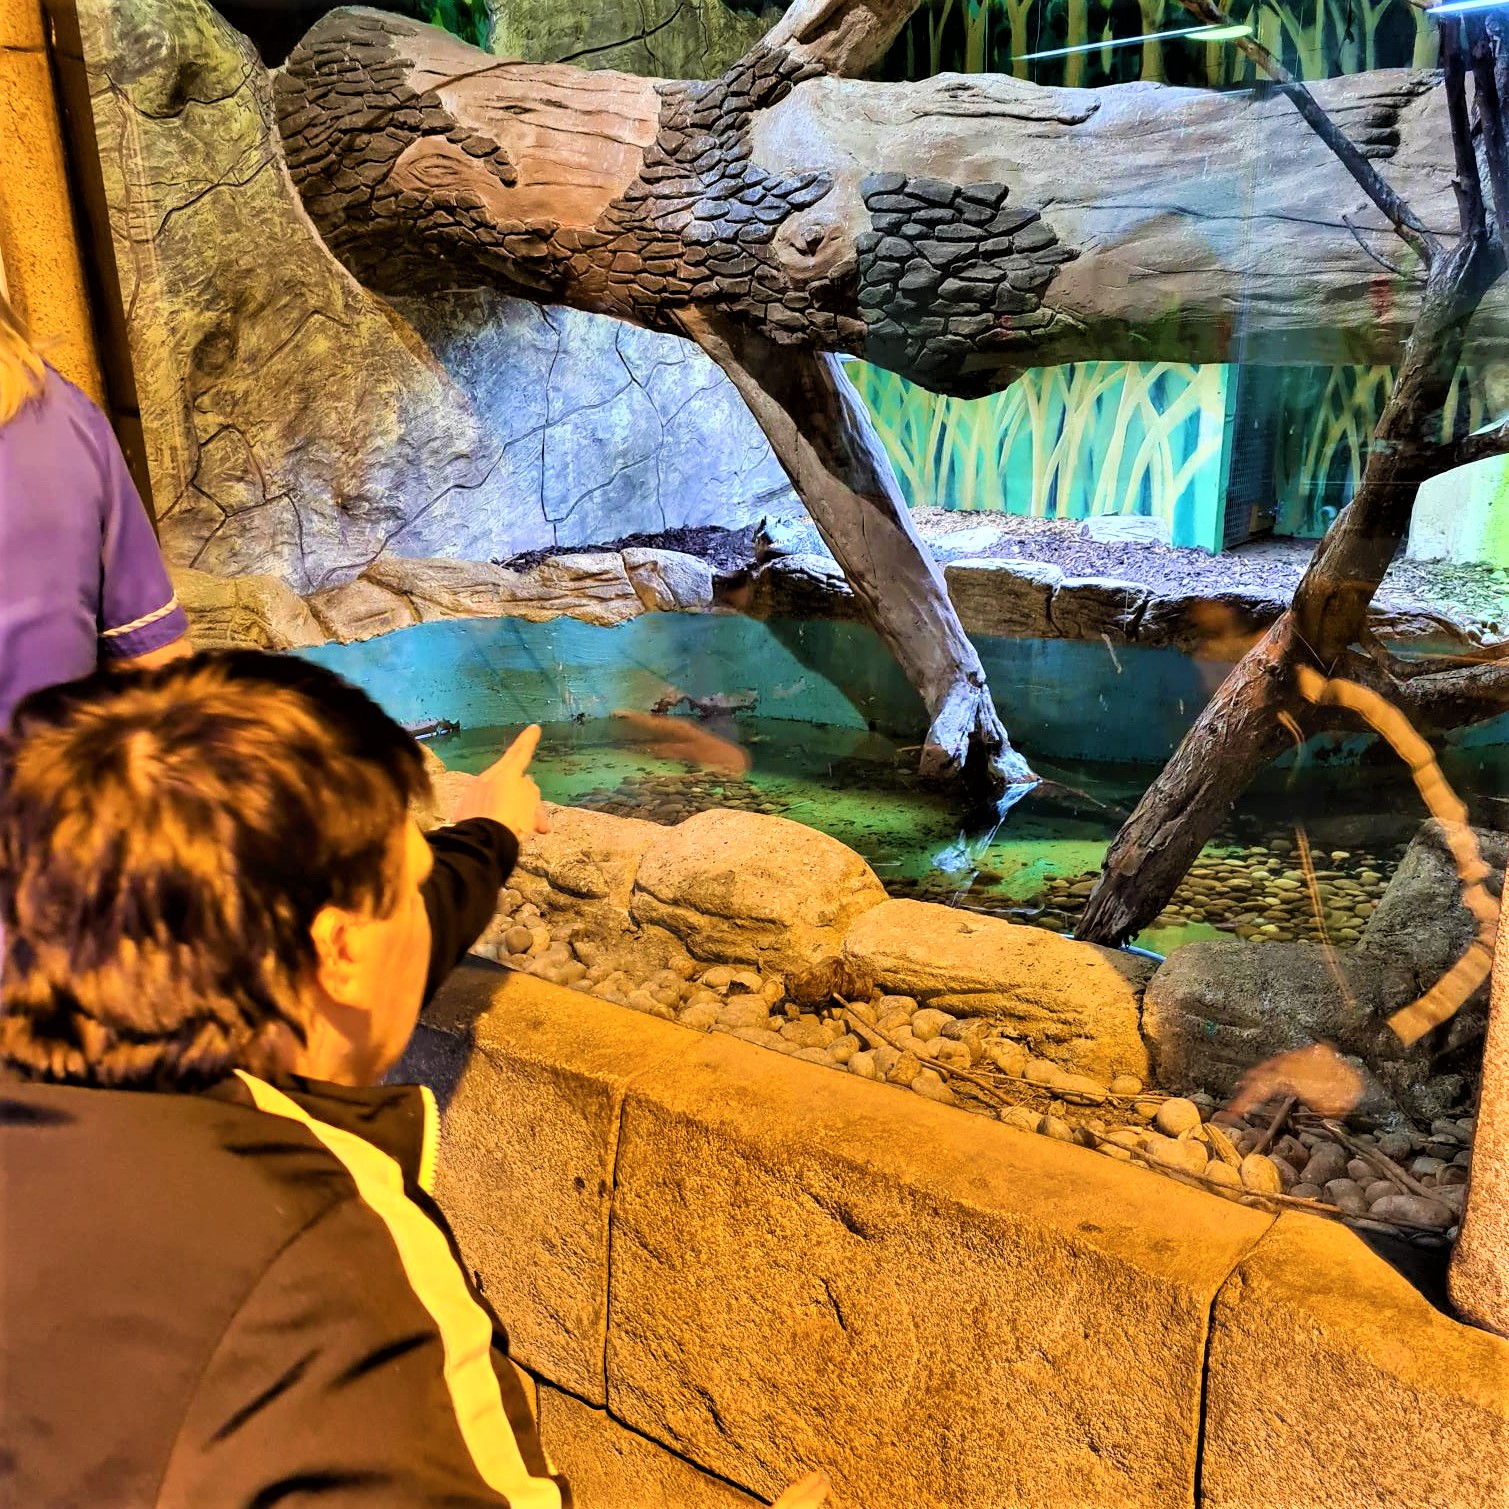 resident in wheelchair looking at reptile in enclosure